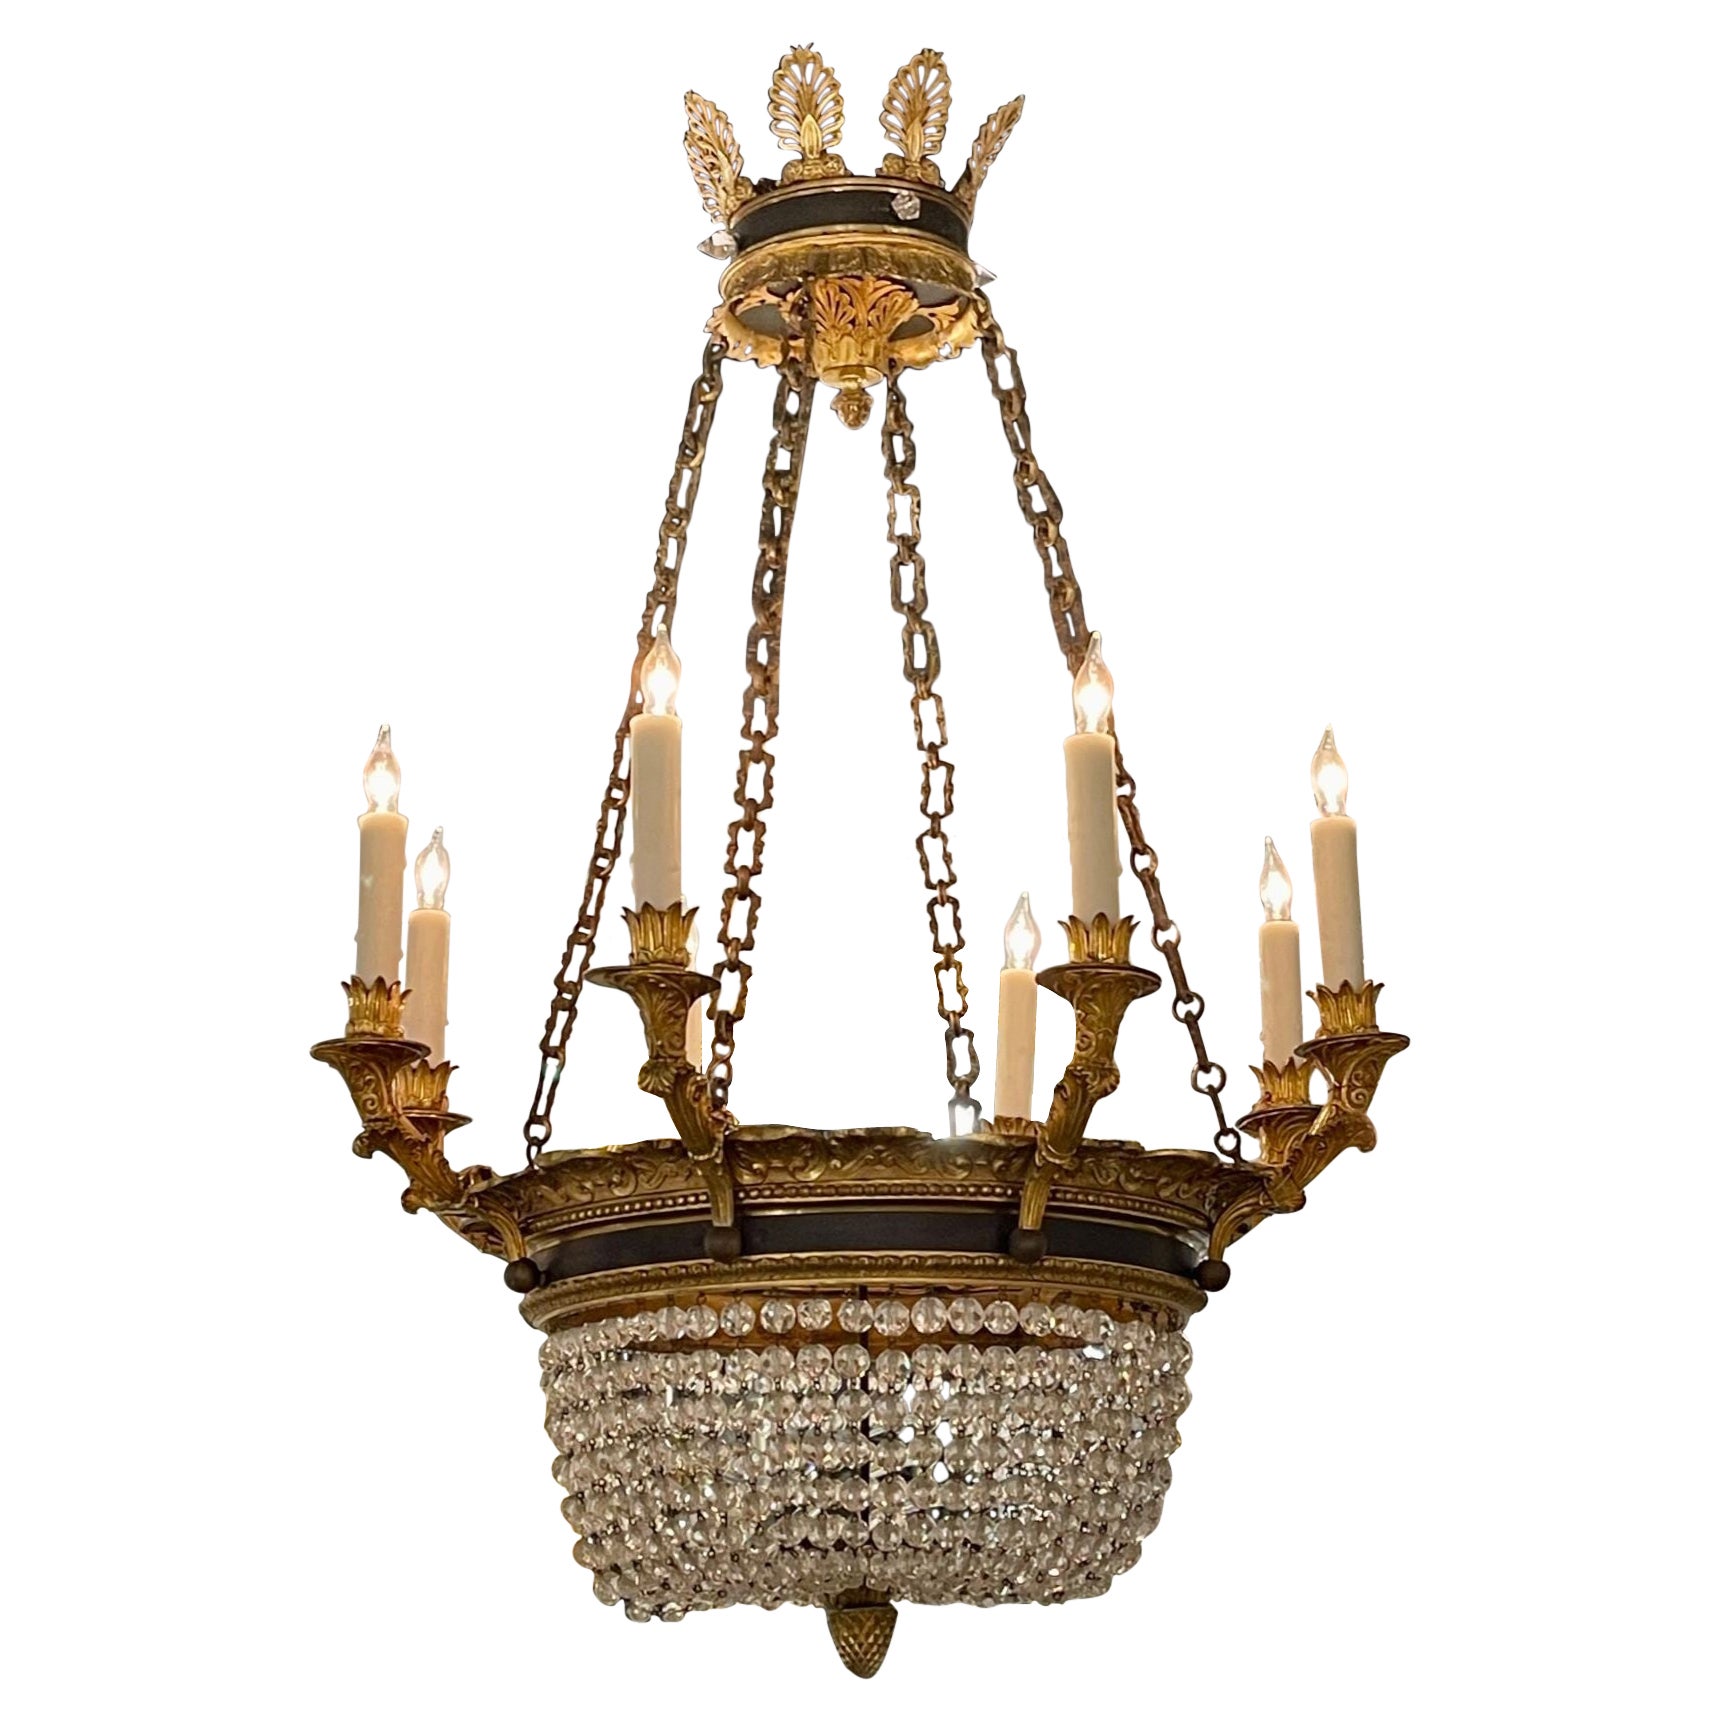 19th Century French Empire Basket Style Chandelier For Sale